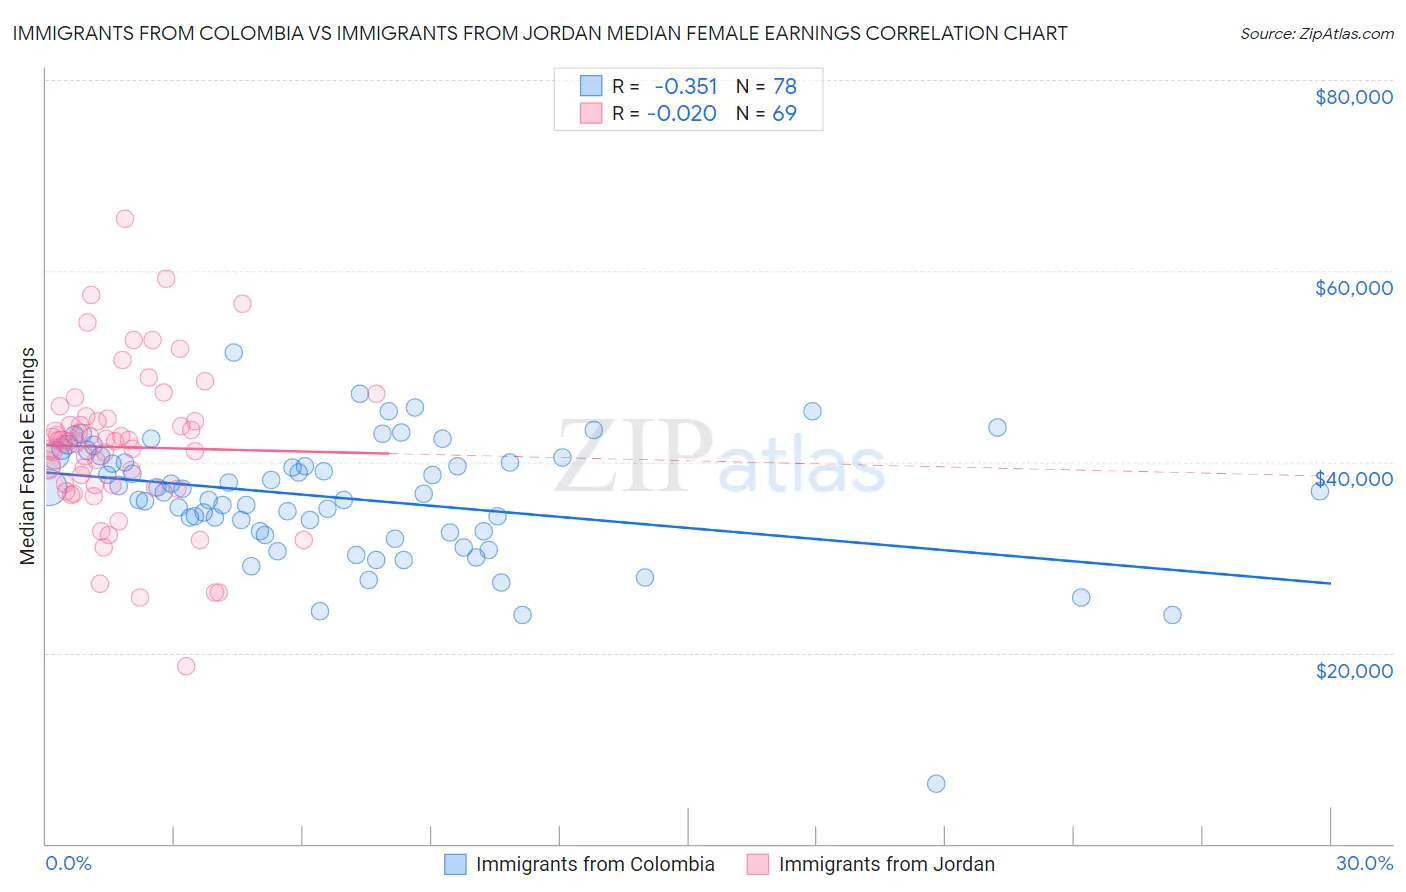 Immigrants from Colombia vs Immigrants from Jordan Median Female Earnings